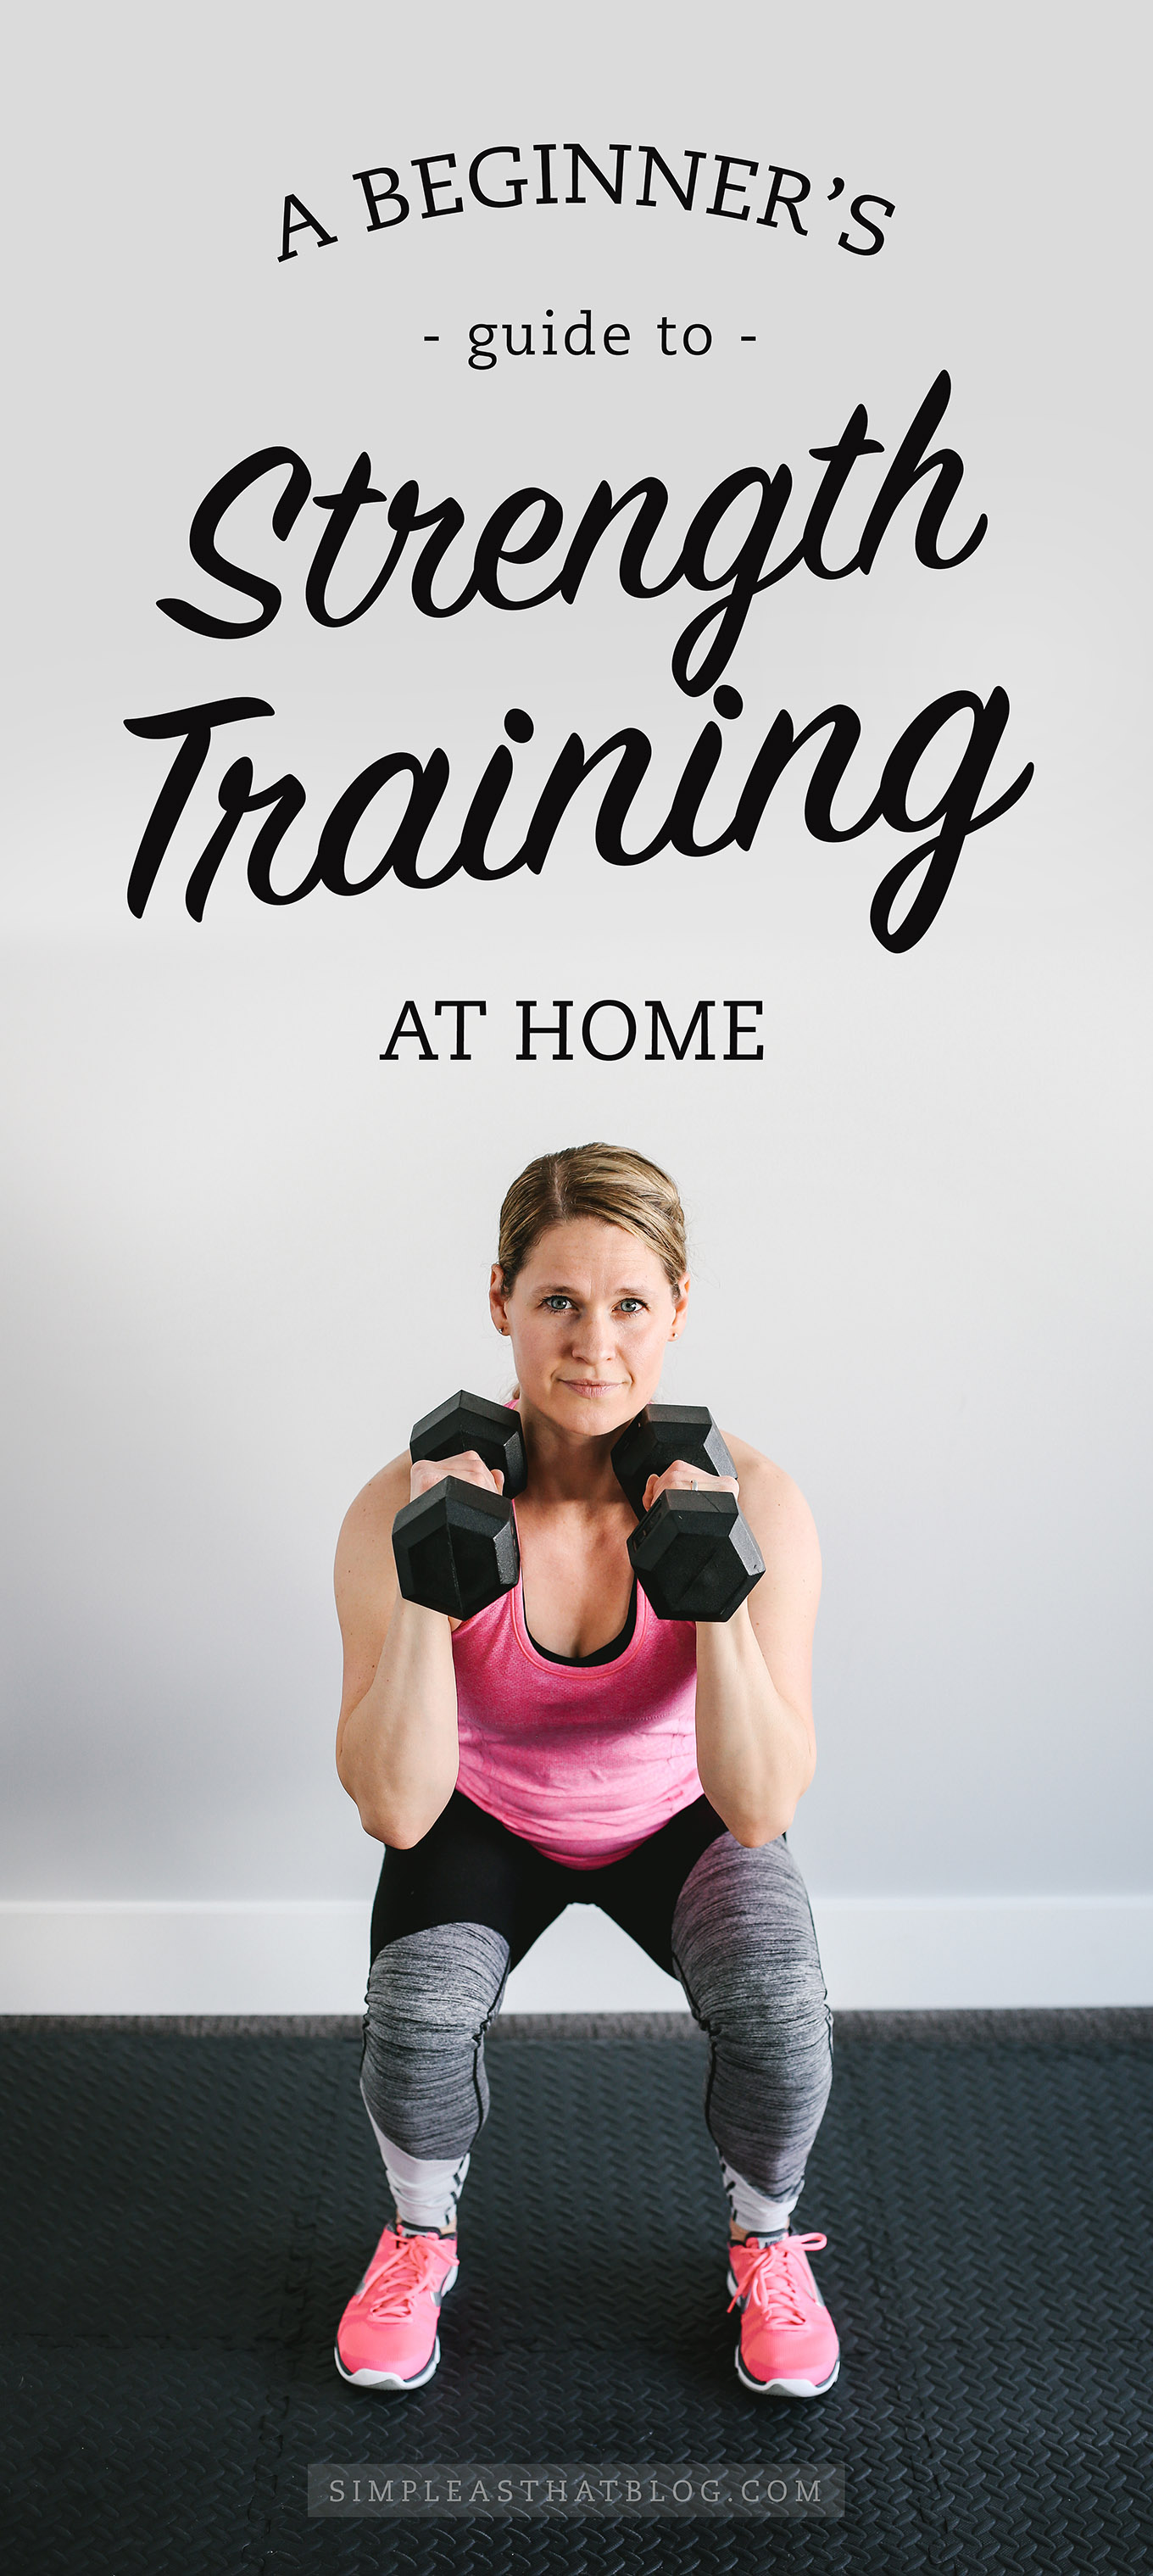 Interested in fitness training at home but unsure where to start? Check out “A Beginner’s Guide to Strength Training at Home” for 5 tips on safe, effective weight training and a 30-minute total body workout you can do today!